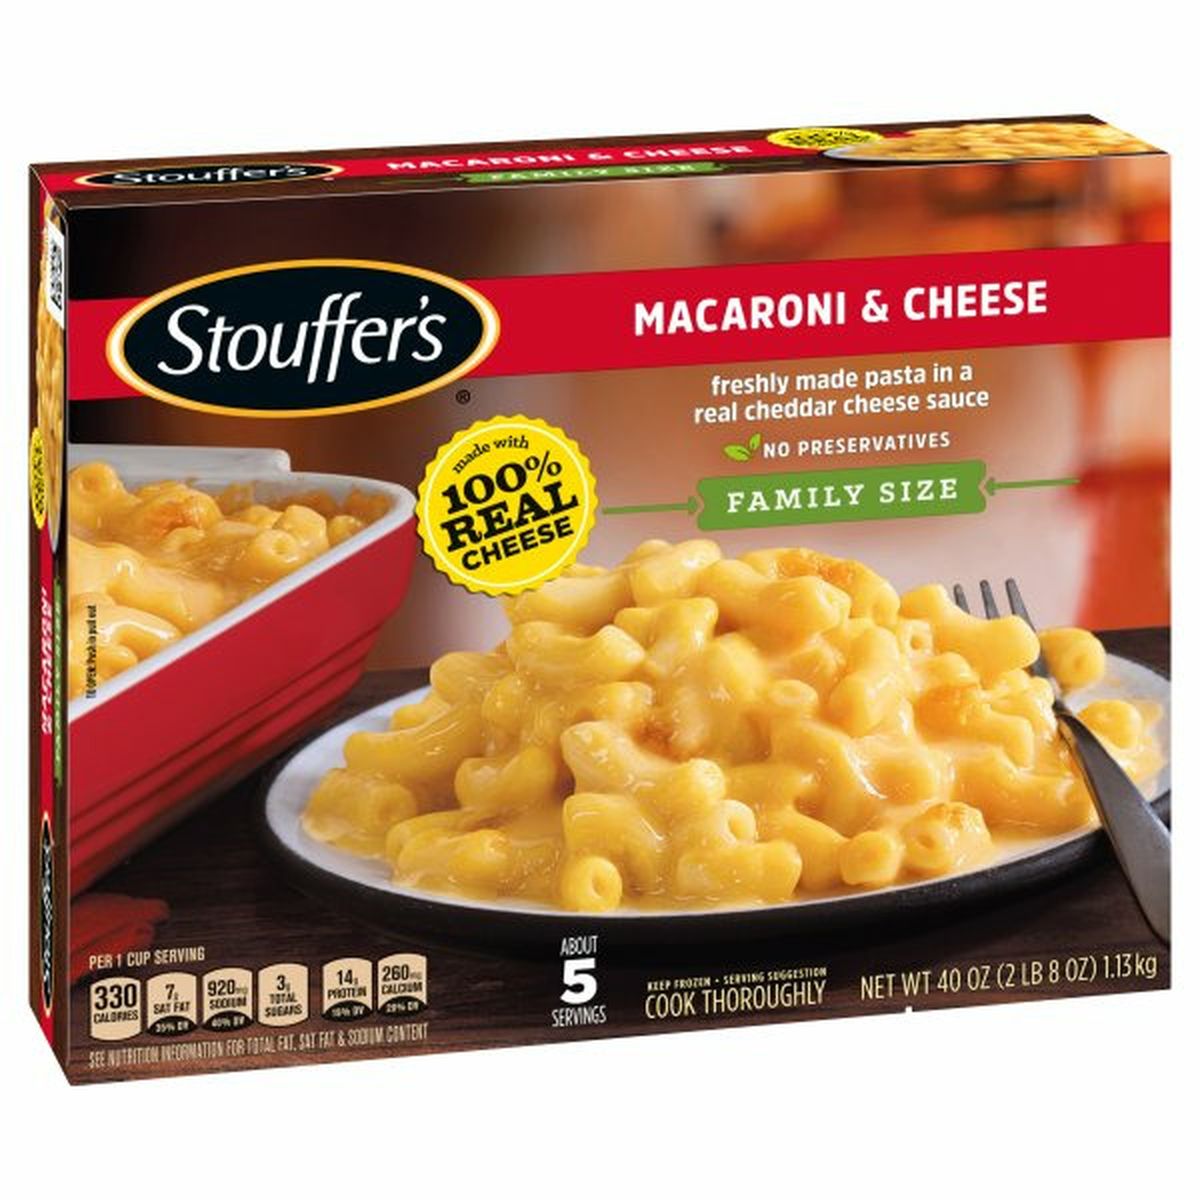 Calories in Stouffer's FAMILY STYLE RECIPE STOUFFER'S CLASSICS Macaroni & Cheese, Family Size Frozen Meal